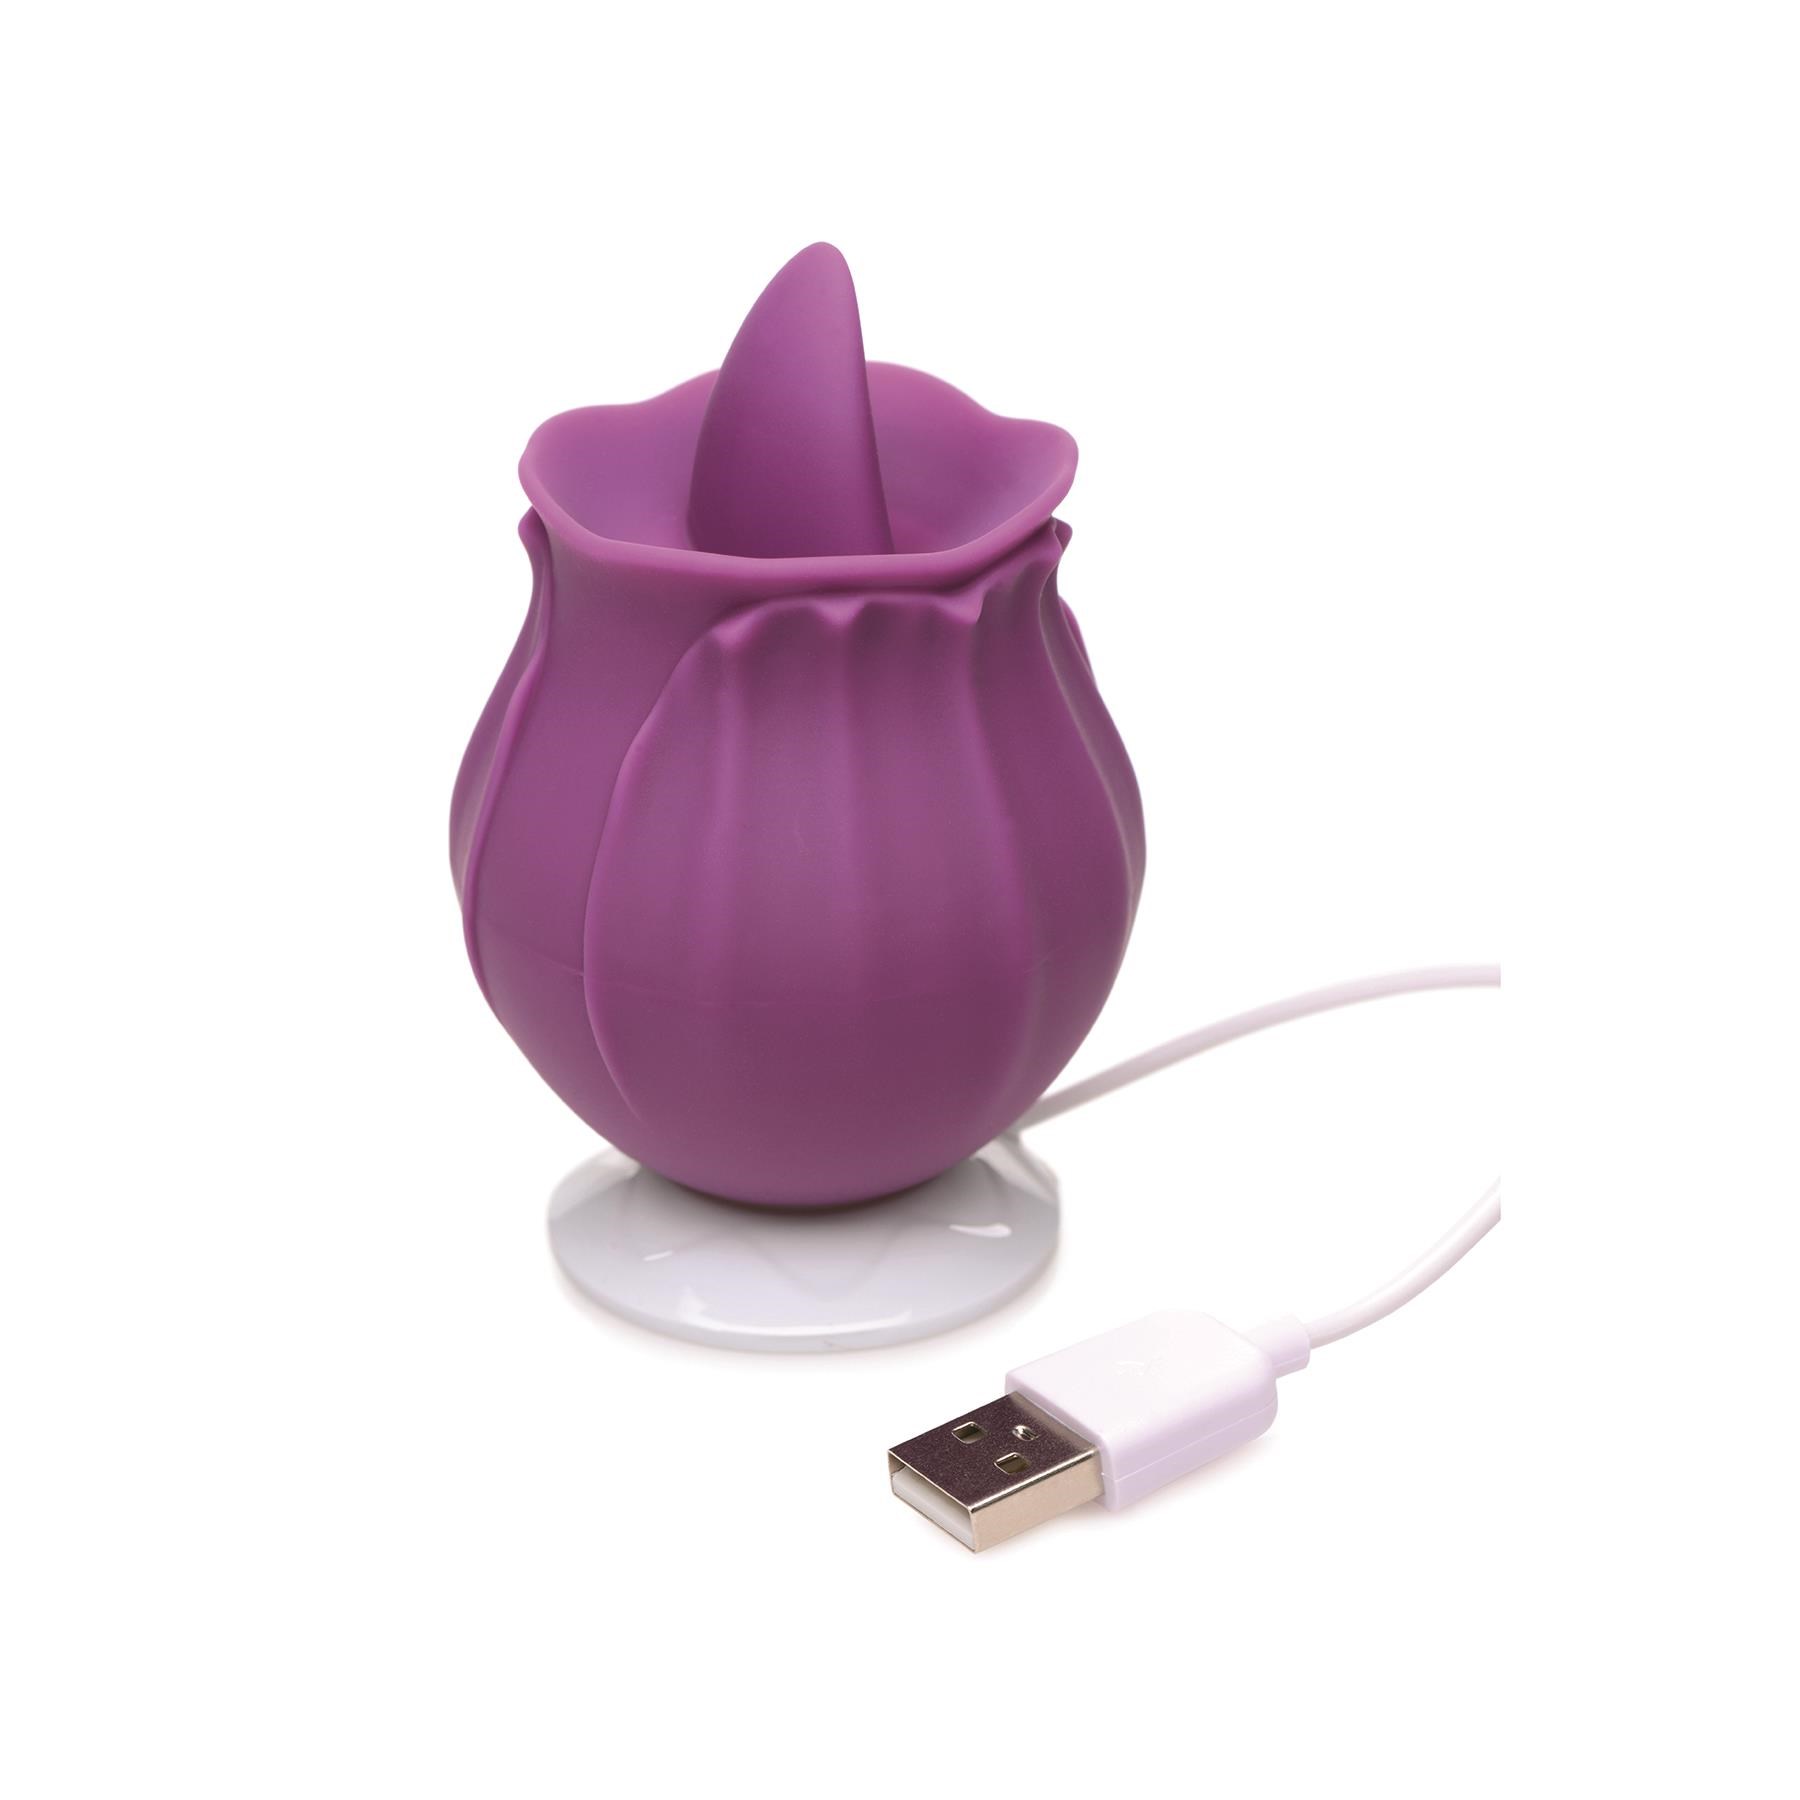 Bloomgasm Wild Violet Licking Clitoral Stimulator With Charger #1